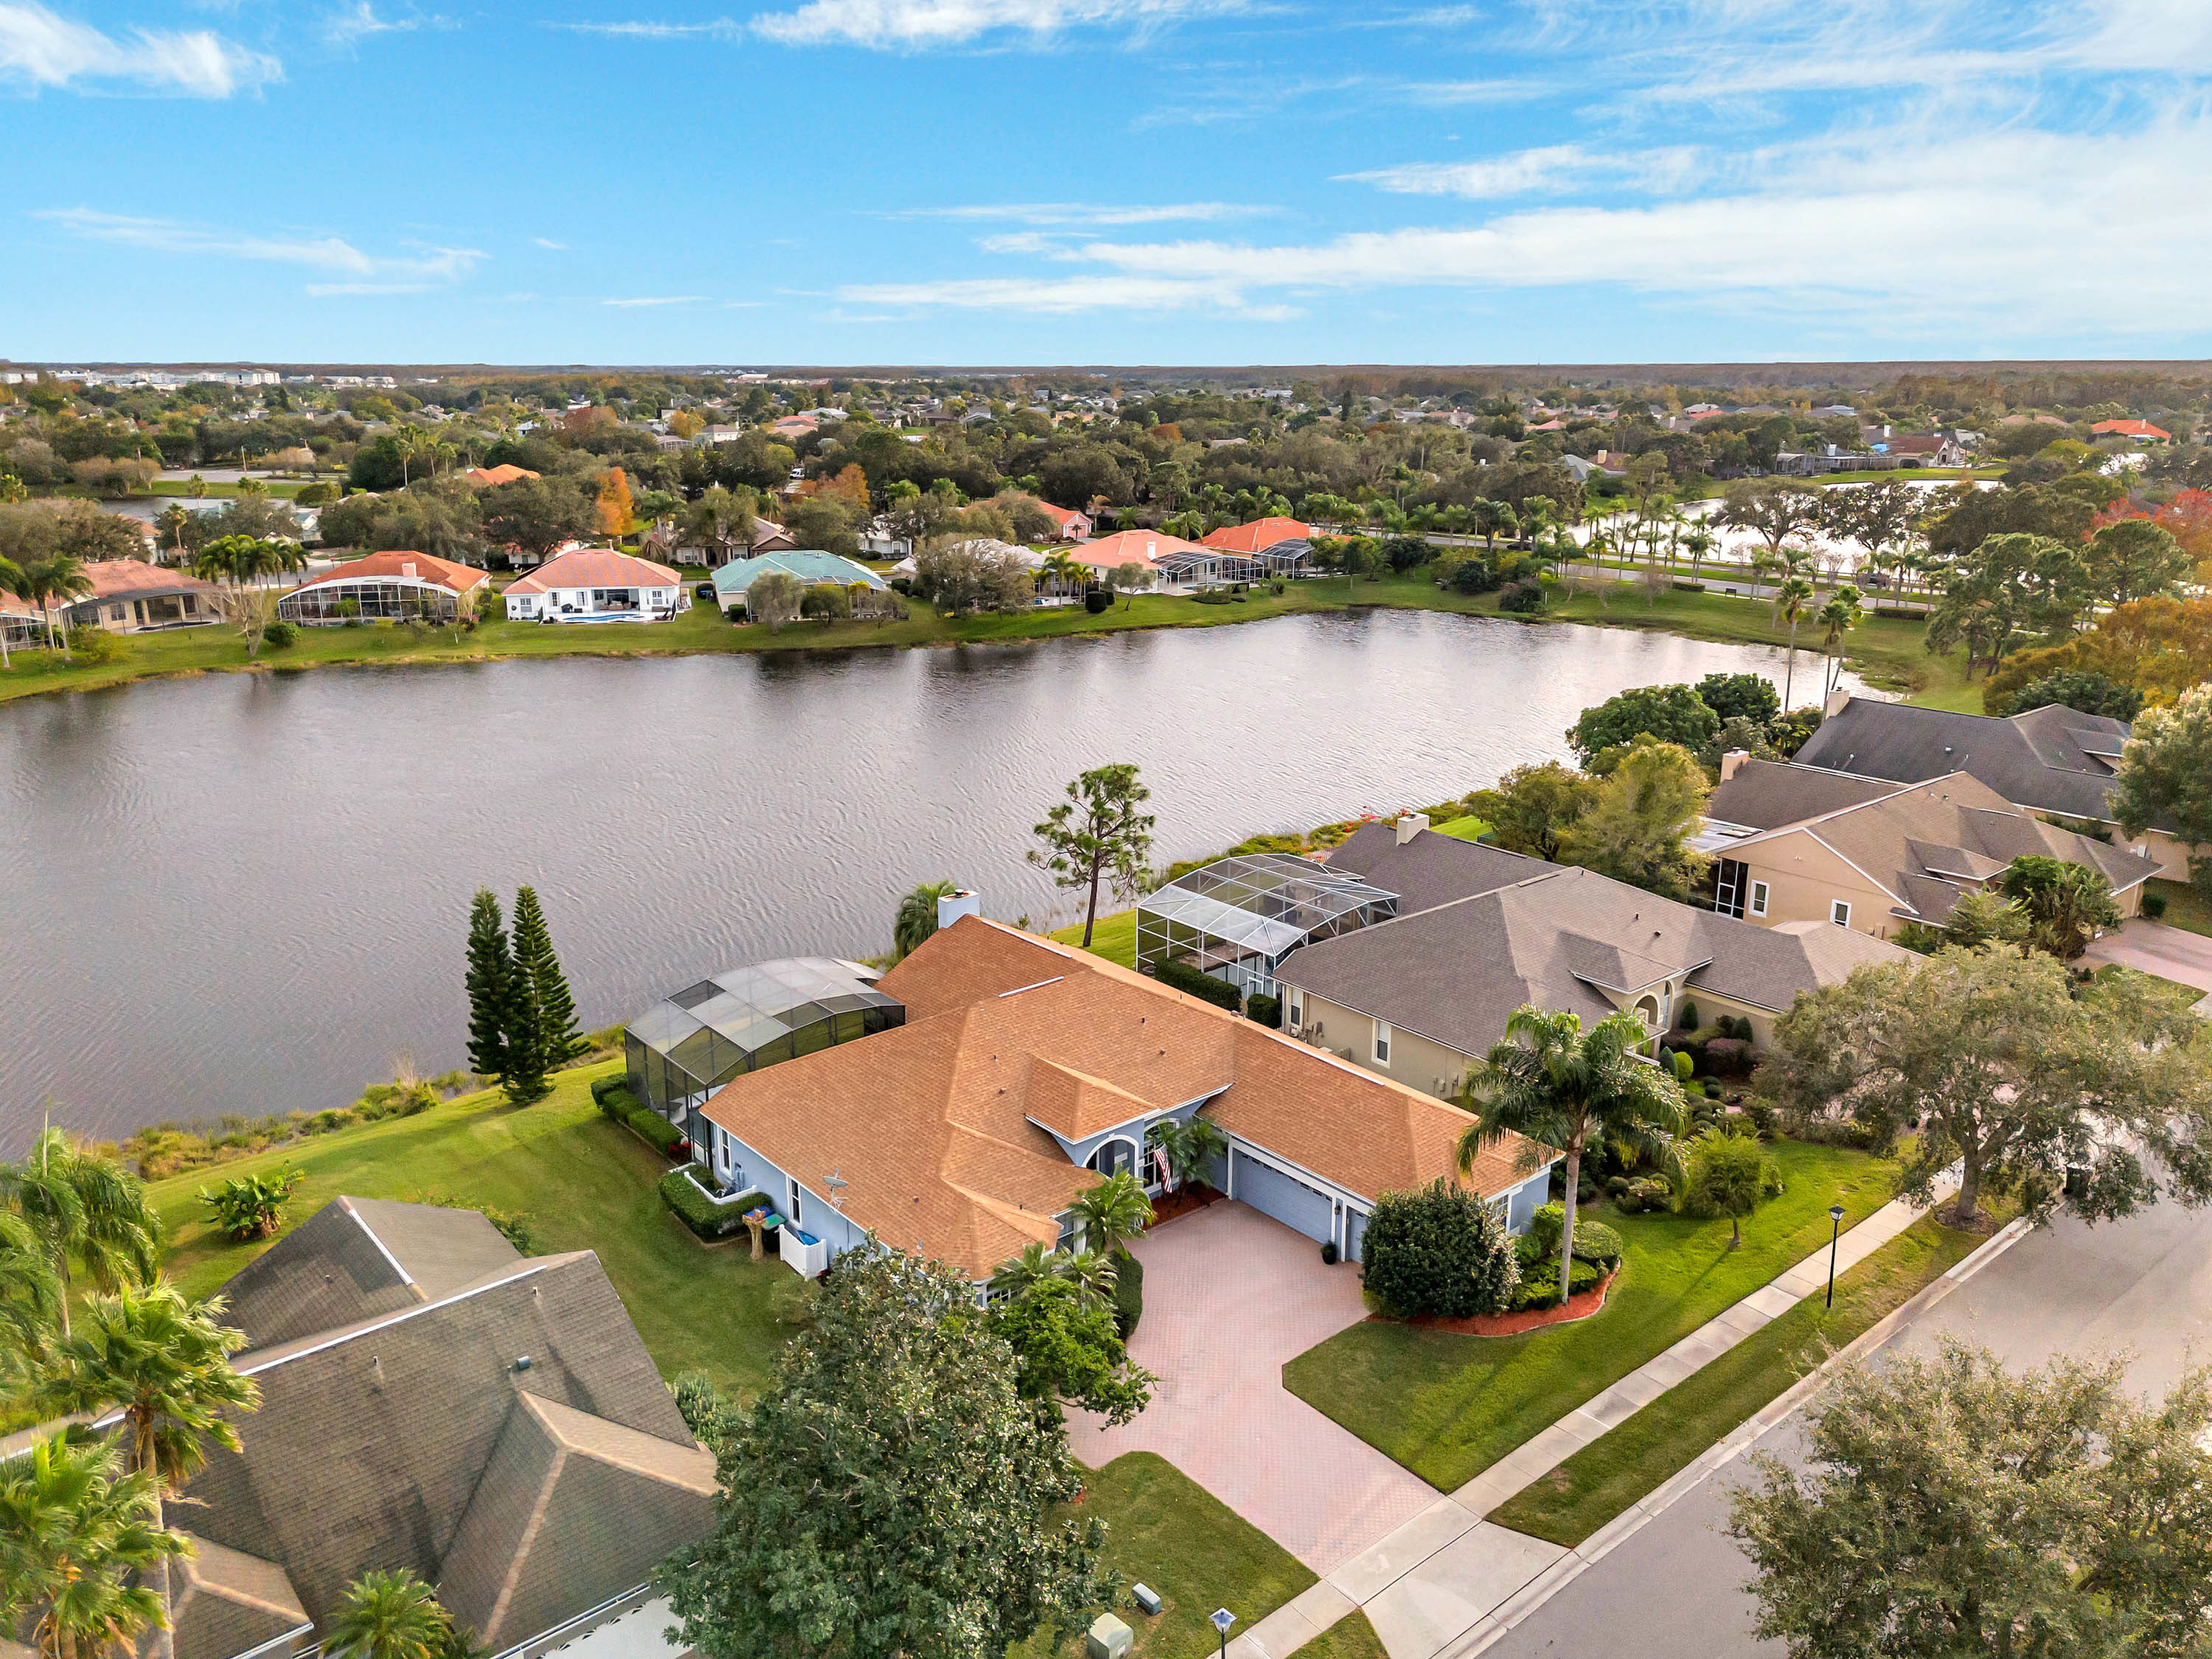 Drone shot of home with orange roof on a lake, typical of Hunter's Creek, Florida